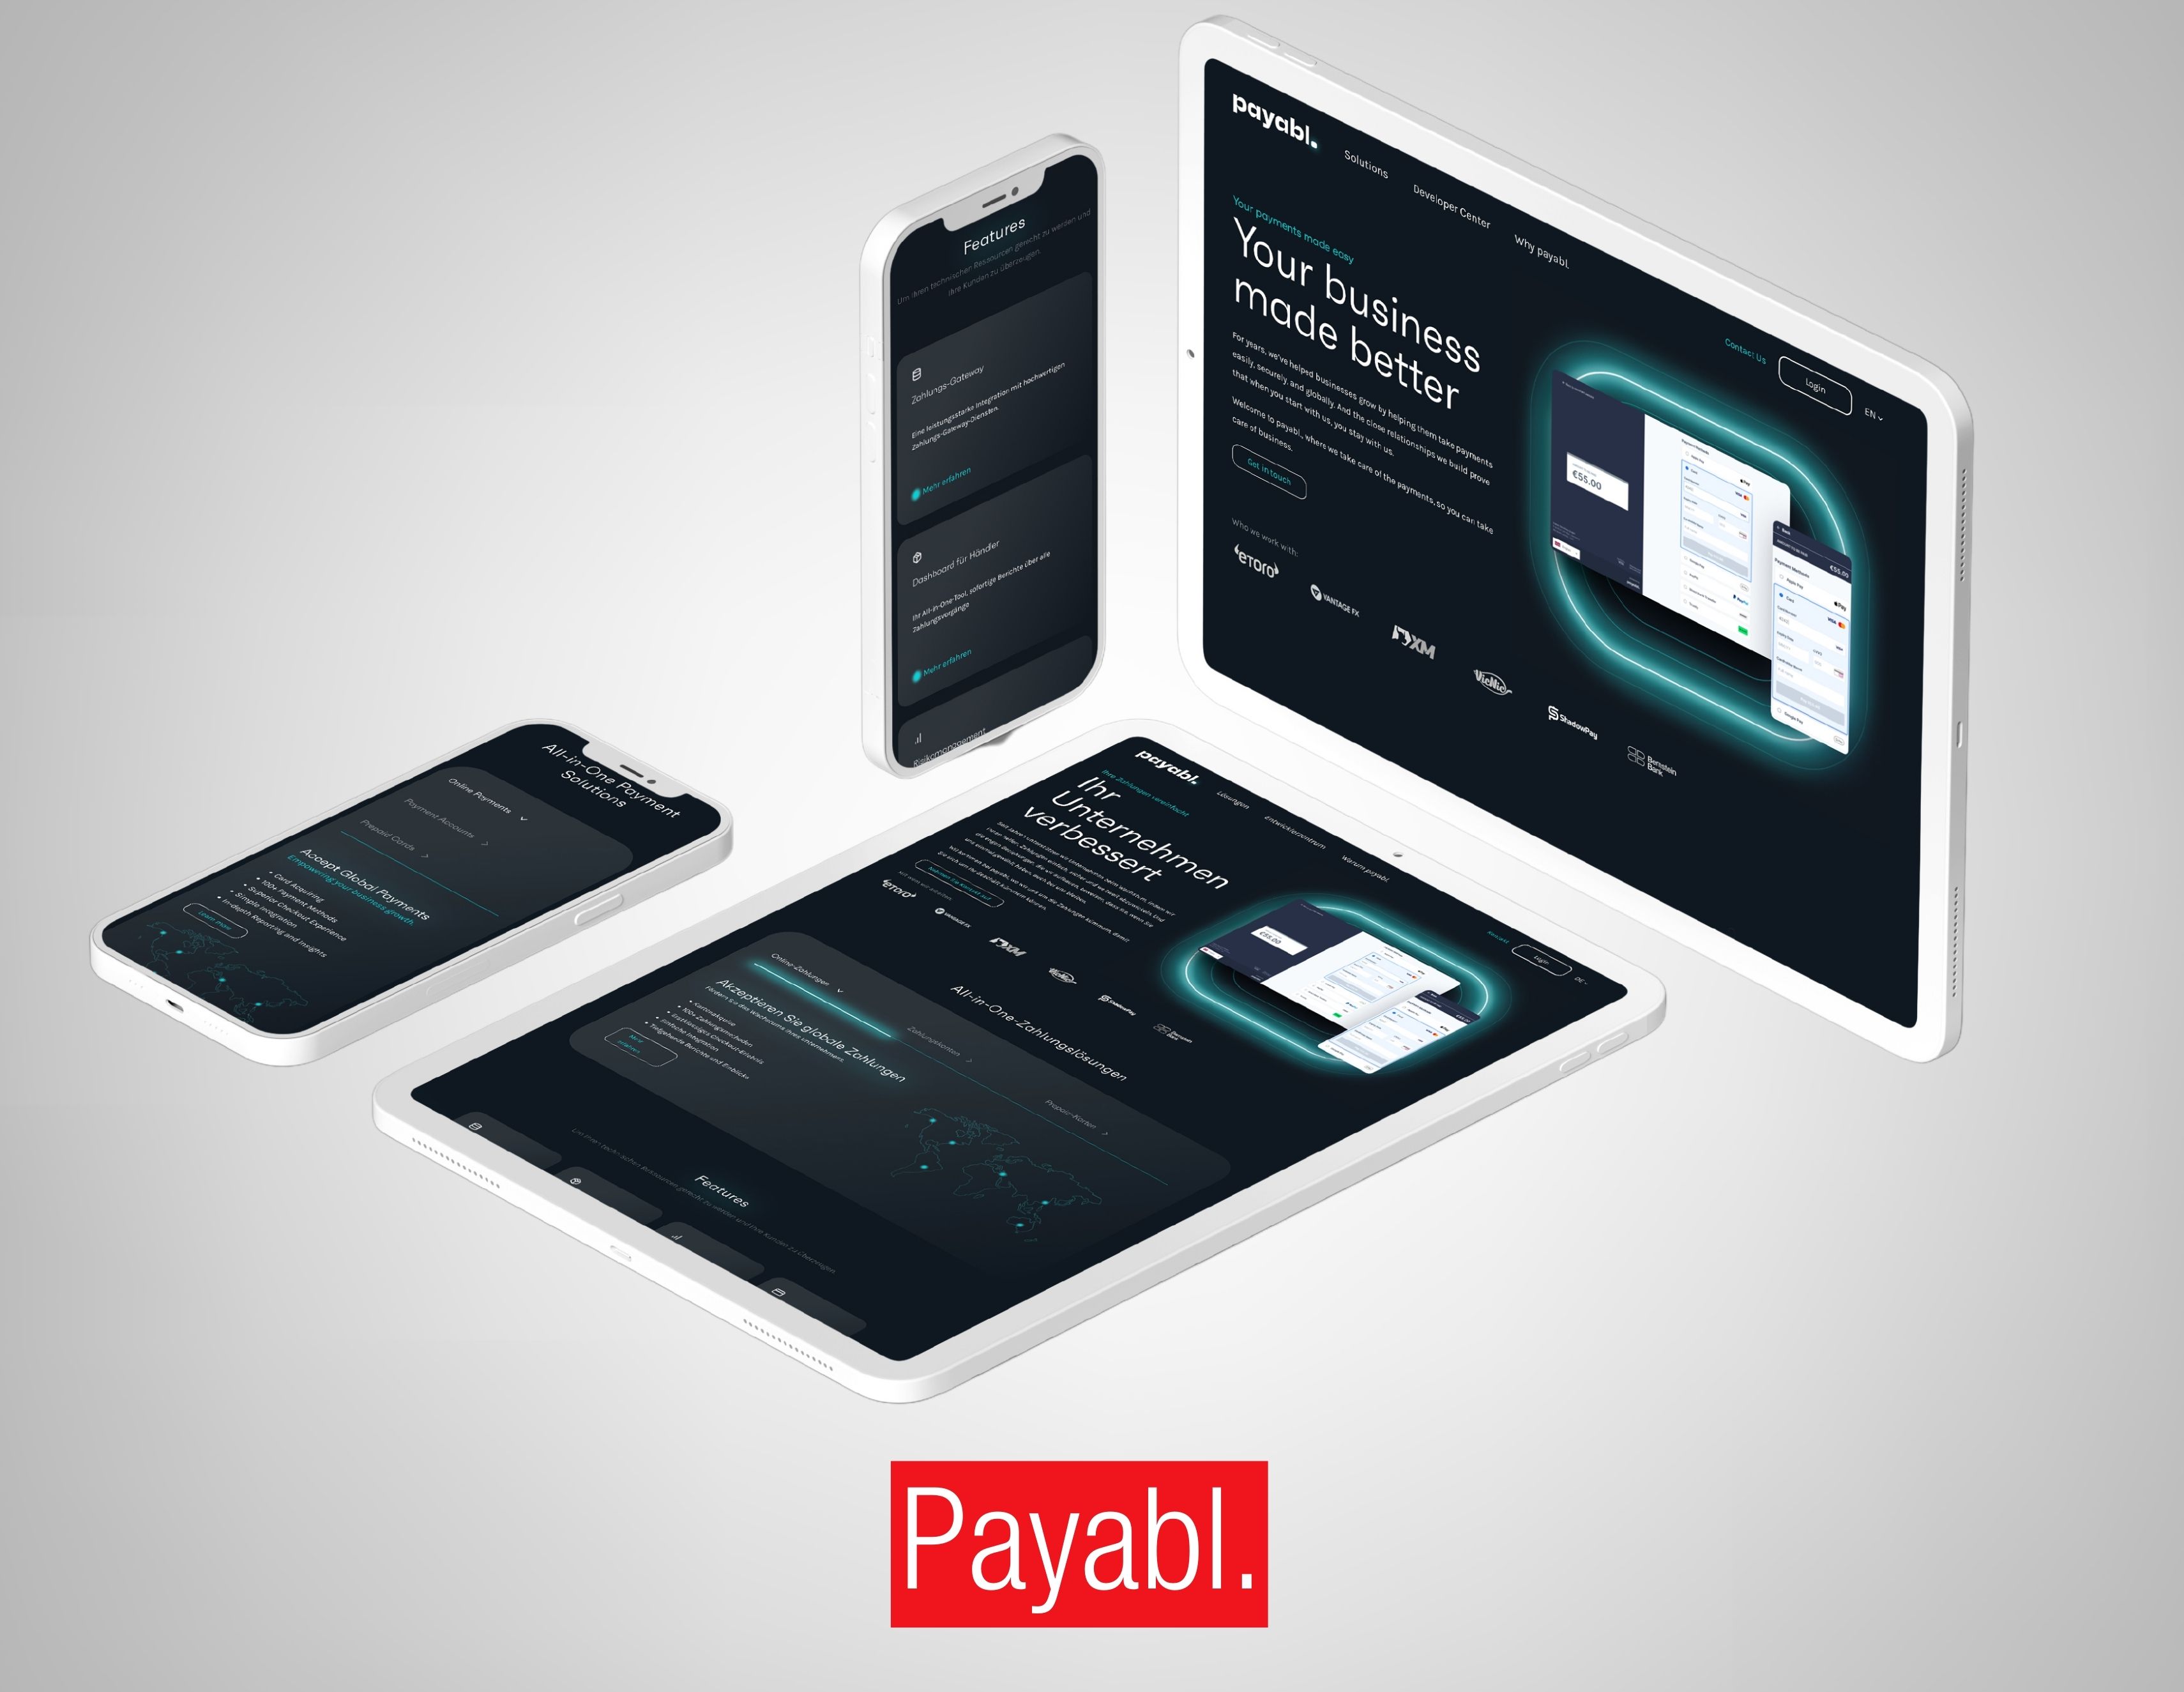 Payabl. Germany - Your payments made easy